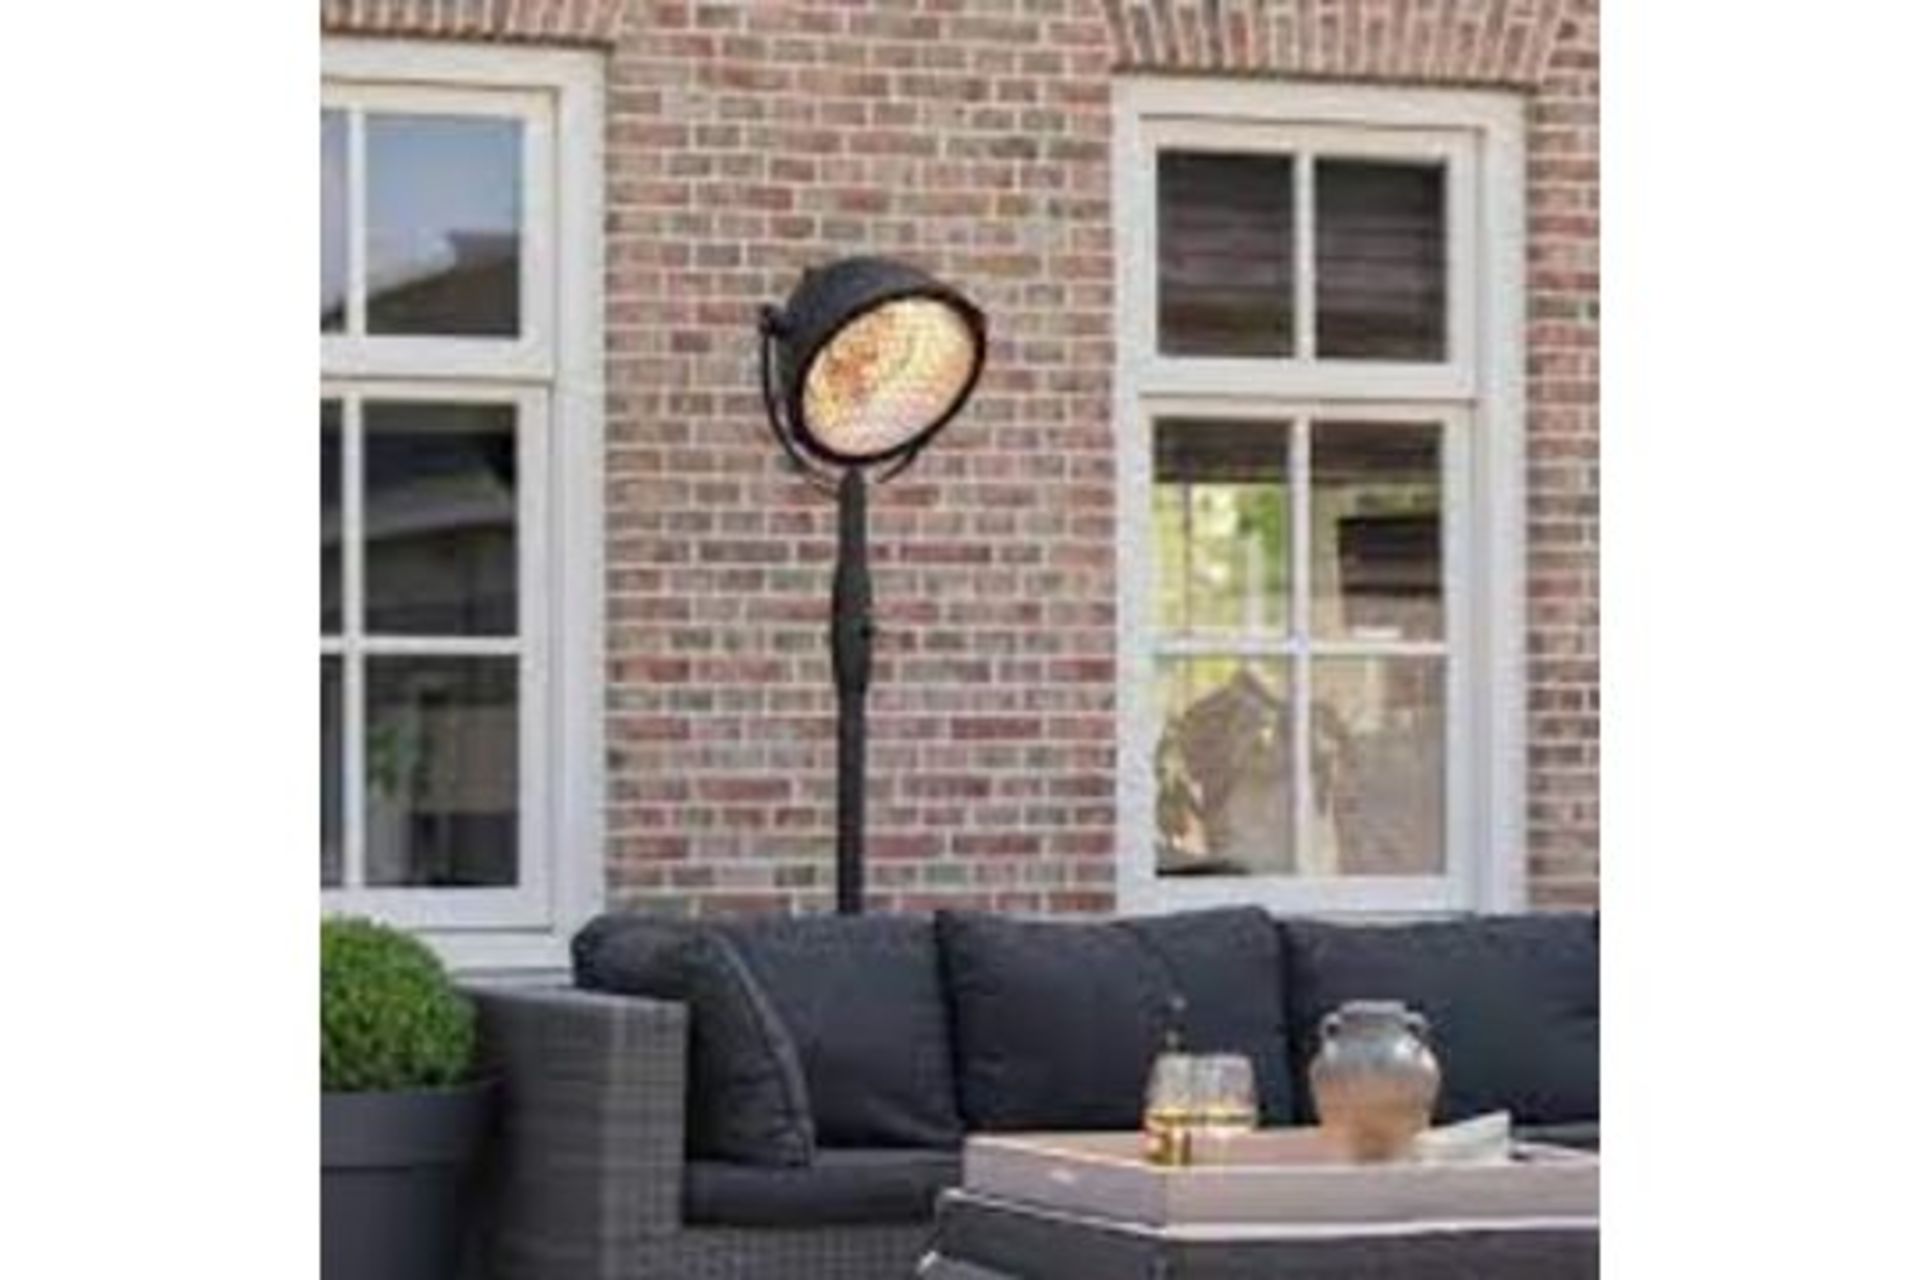 Brand New The Sunred Heater Indus Standing 2100W RRP £429. A high quality and efficient outdoor